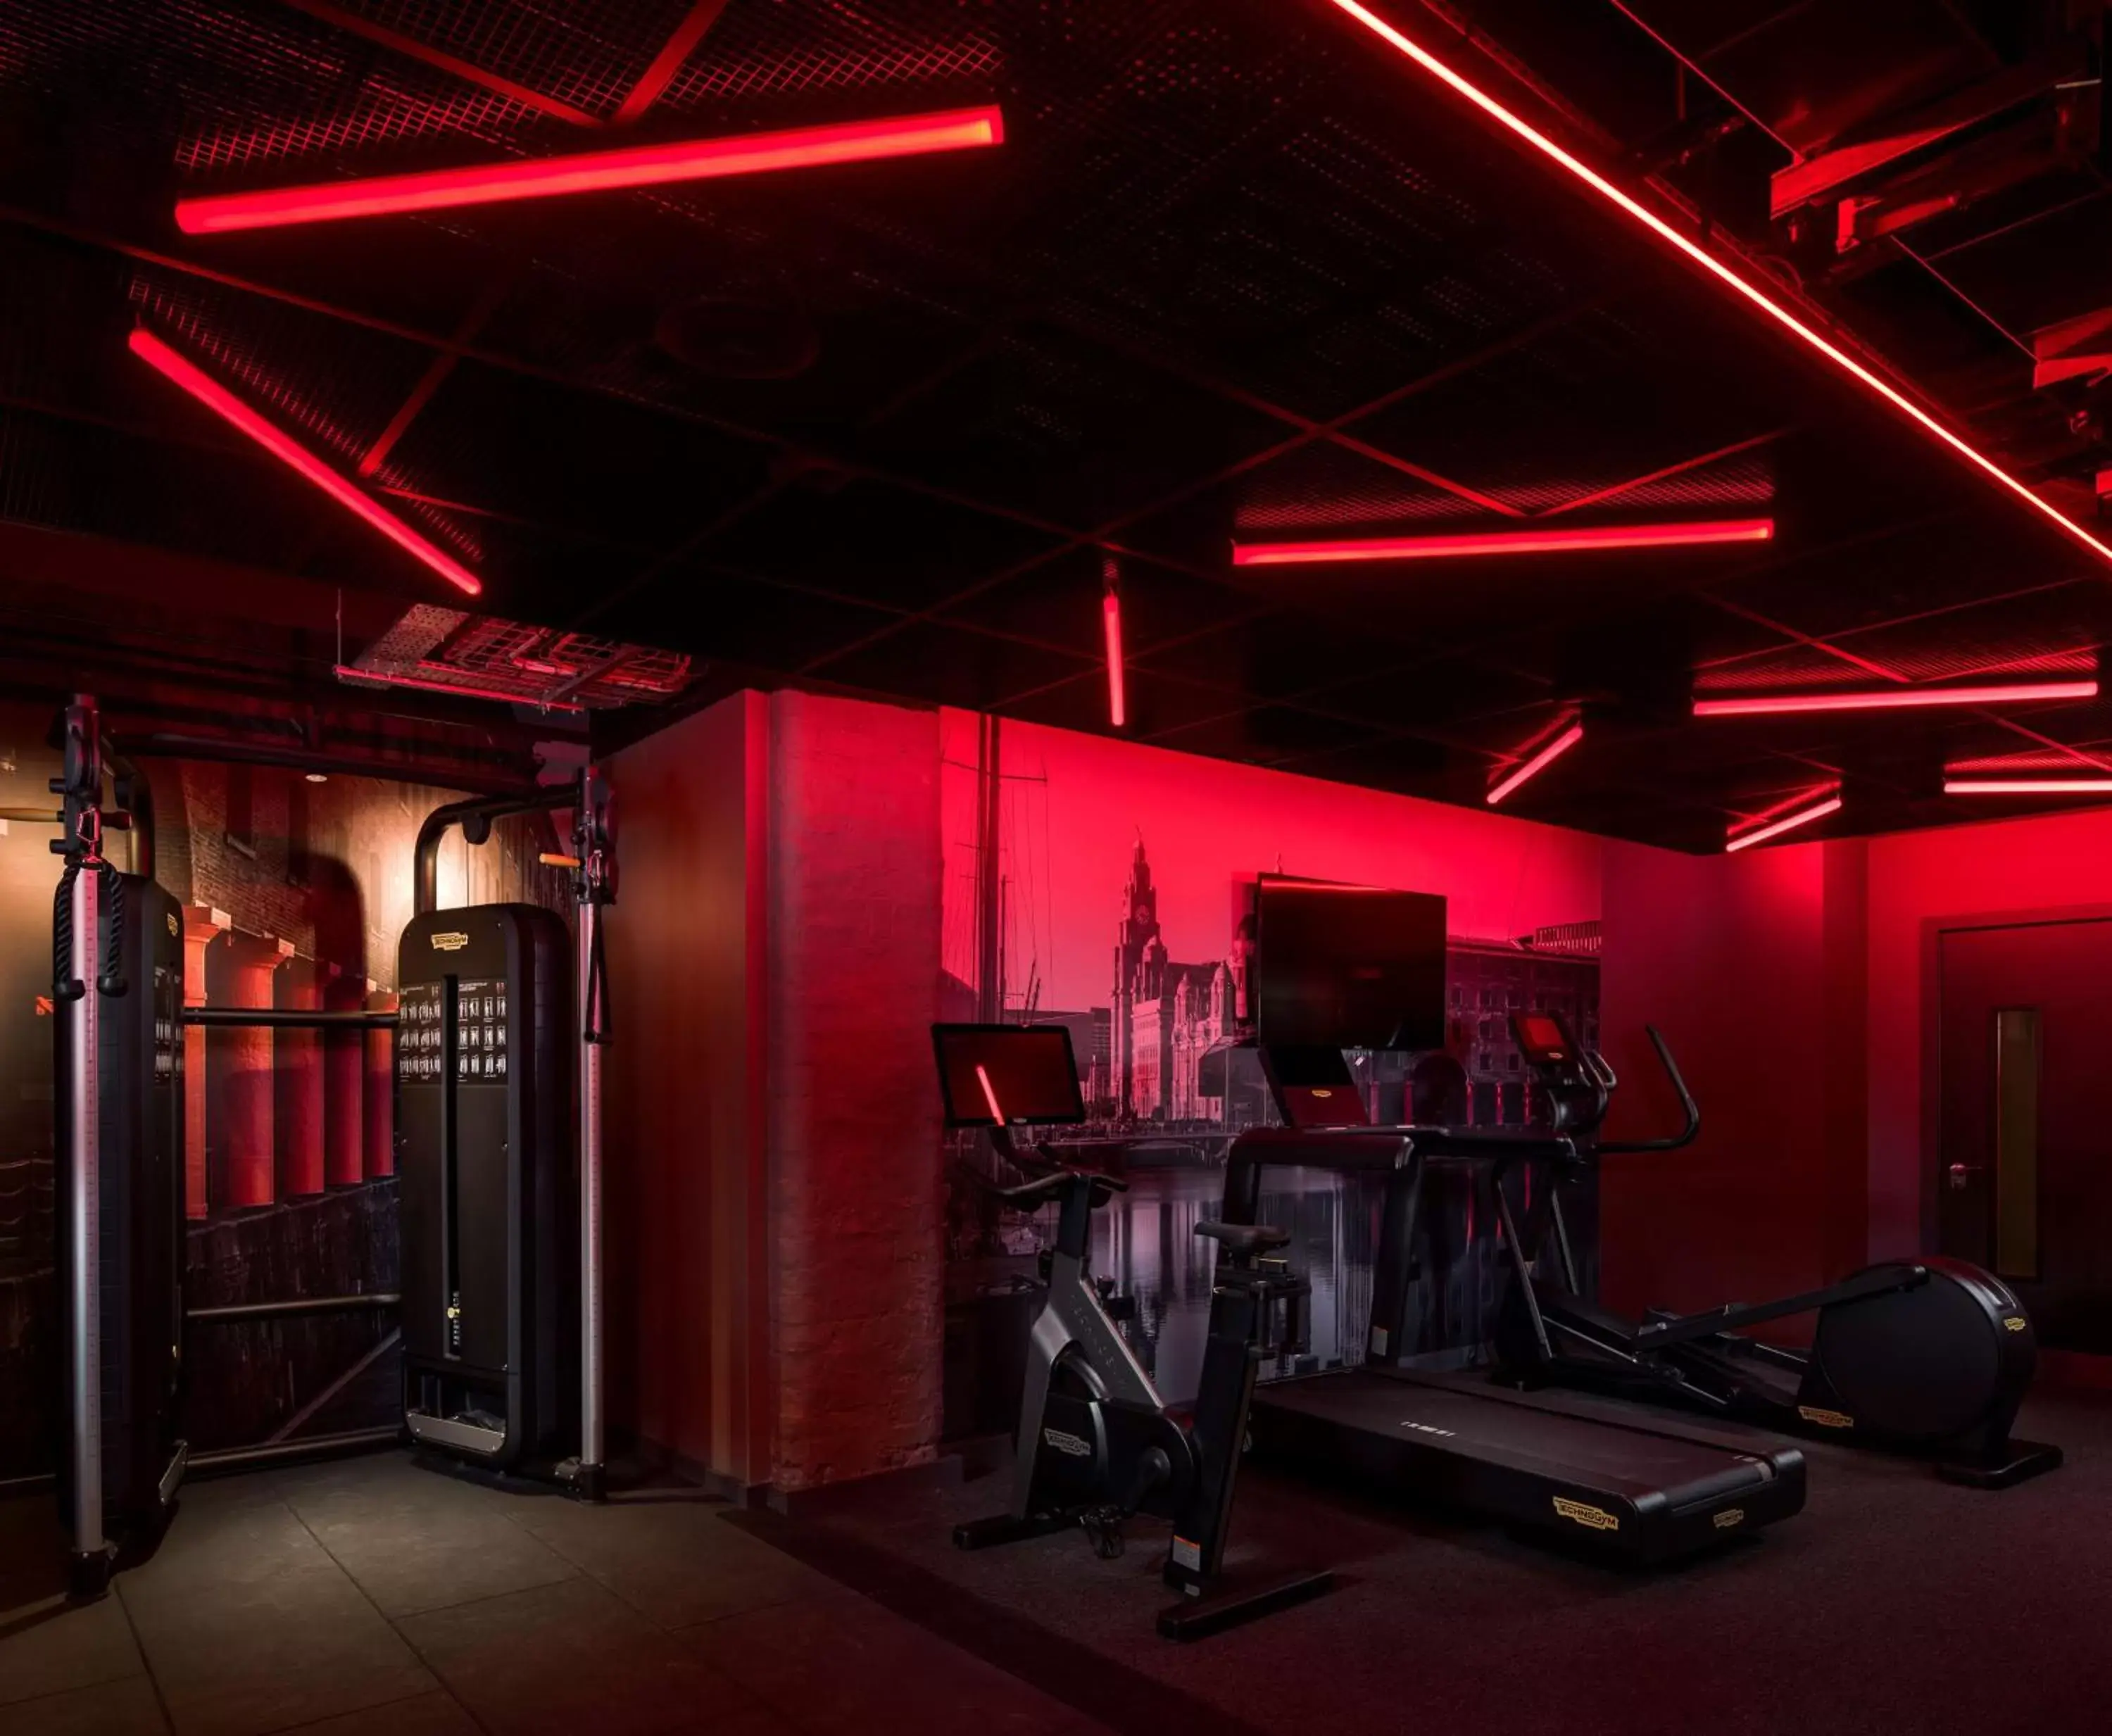 Fitness centre/facilities, Fitness Center/Facilities in Radisson RED Hotel, Liverpool